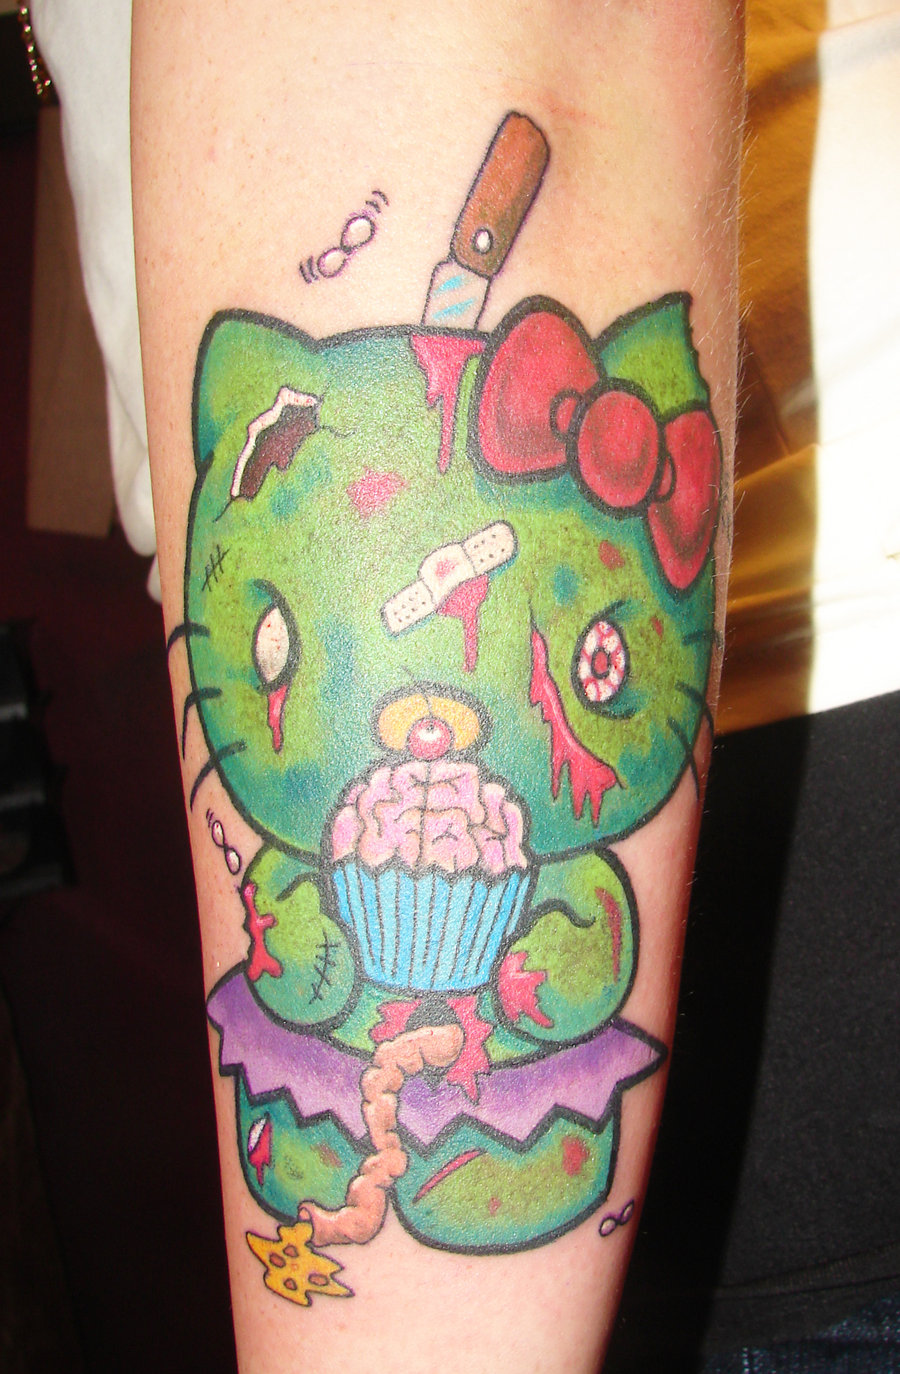 Zombie Hello Kitty Tattoo On Arm by Asuss06